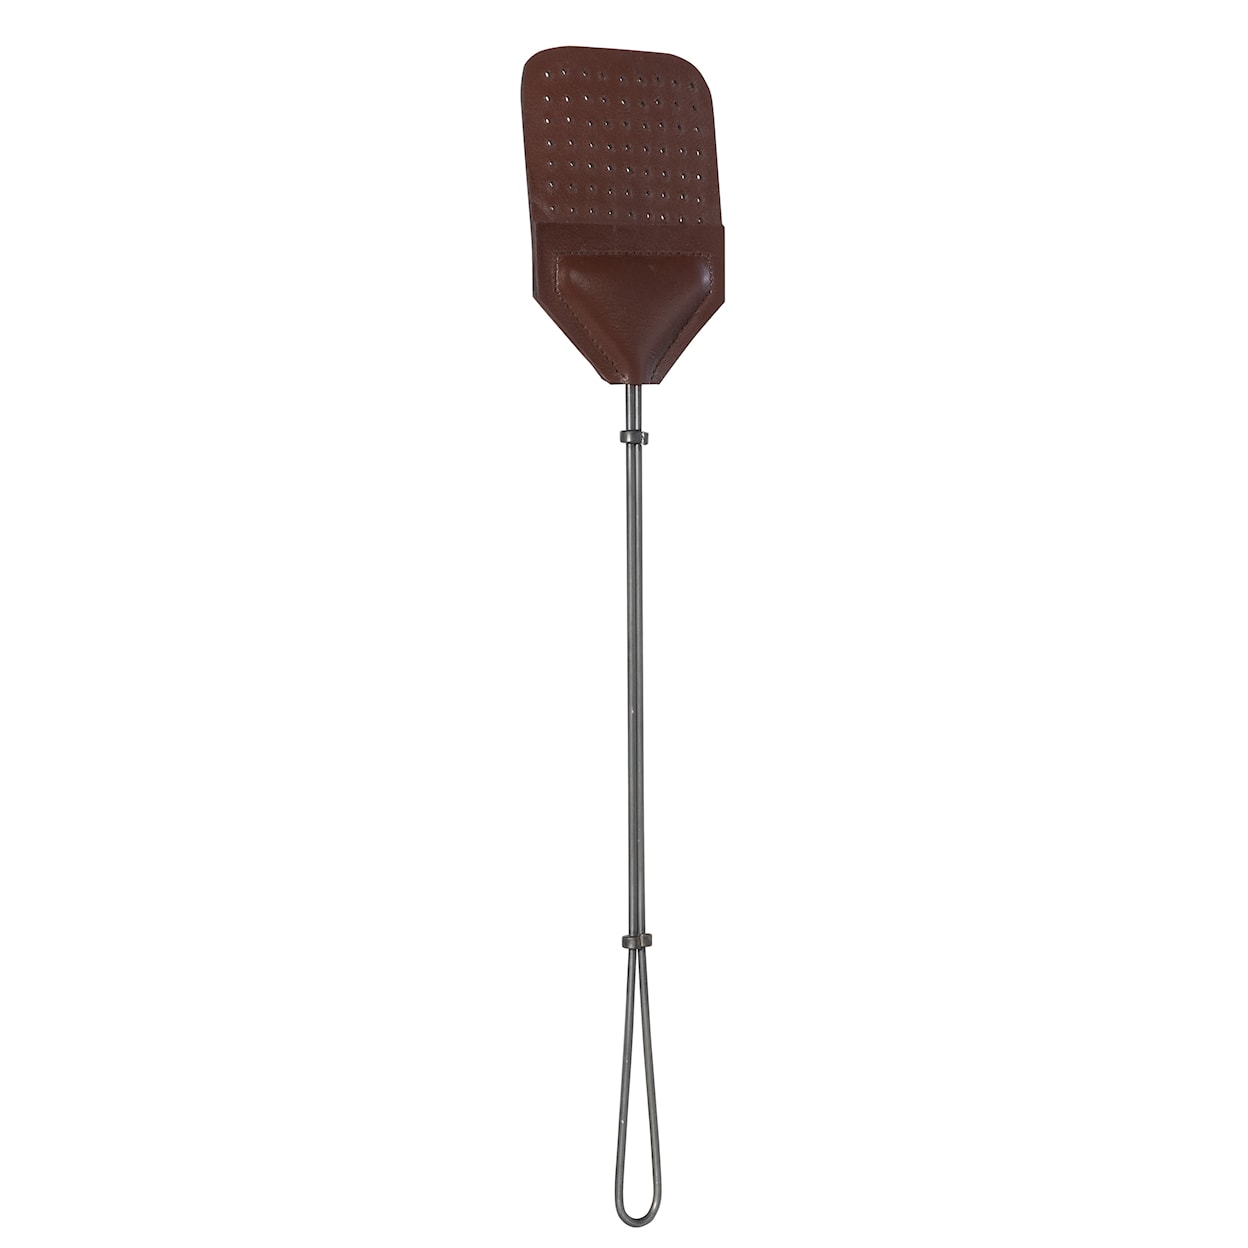 BOBO Intriguing Objects BOBO Intriguing Objects Vintage Leather Fly Swatter